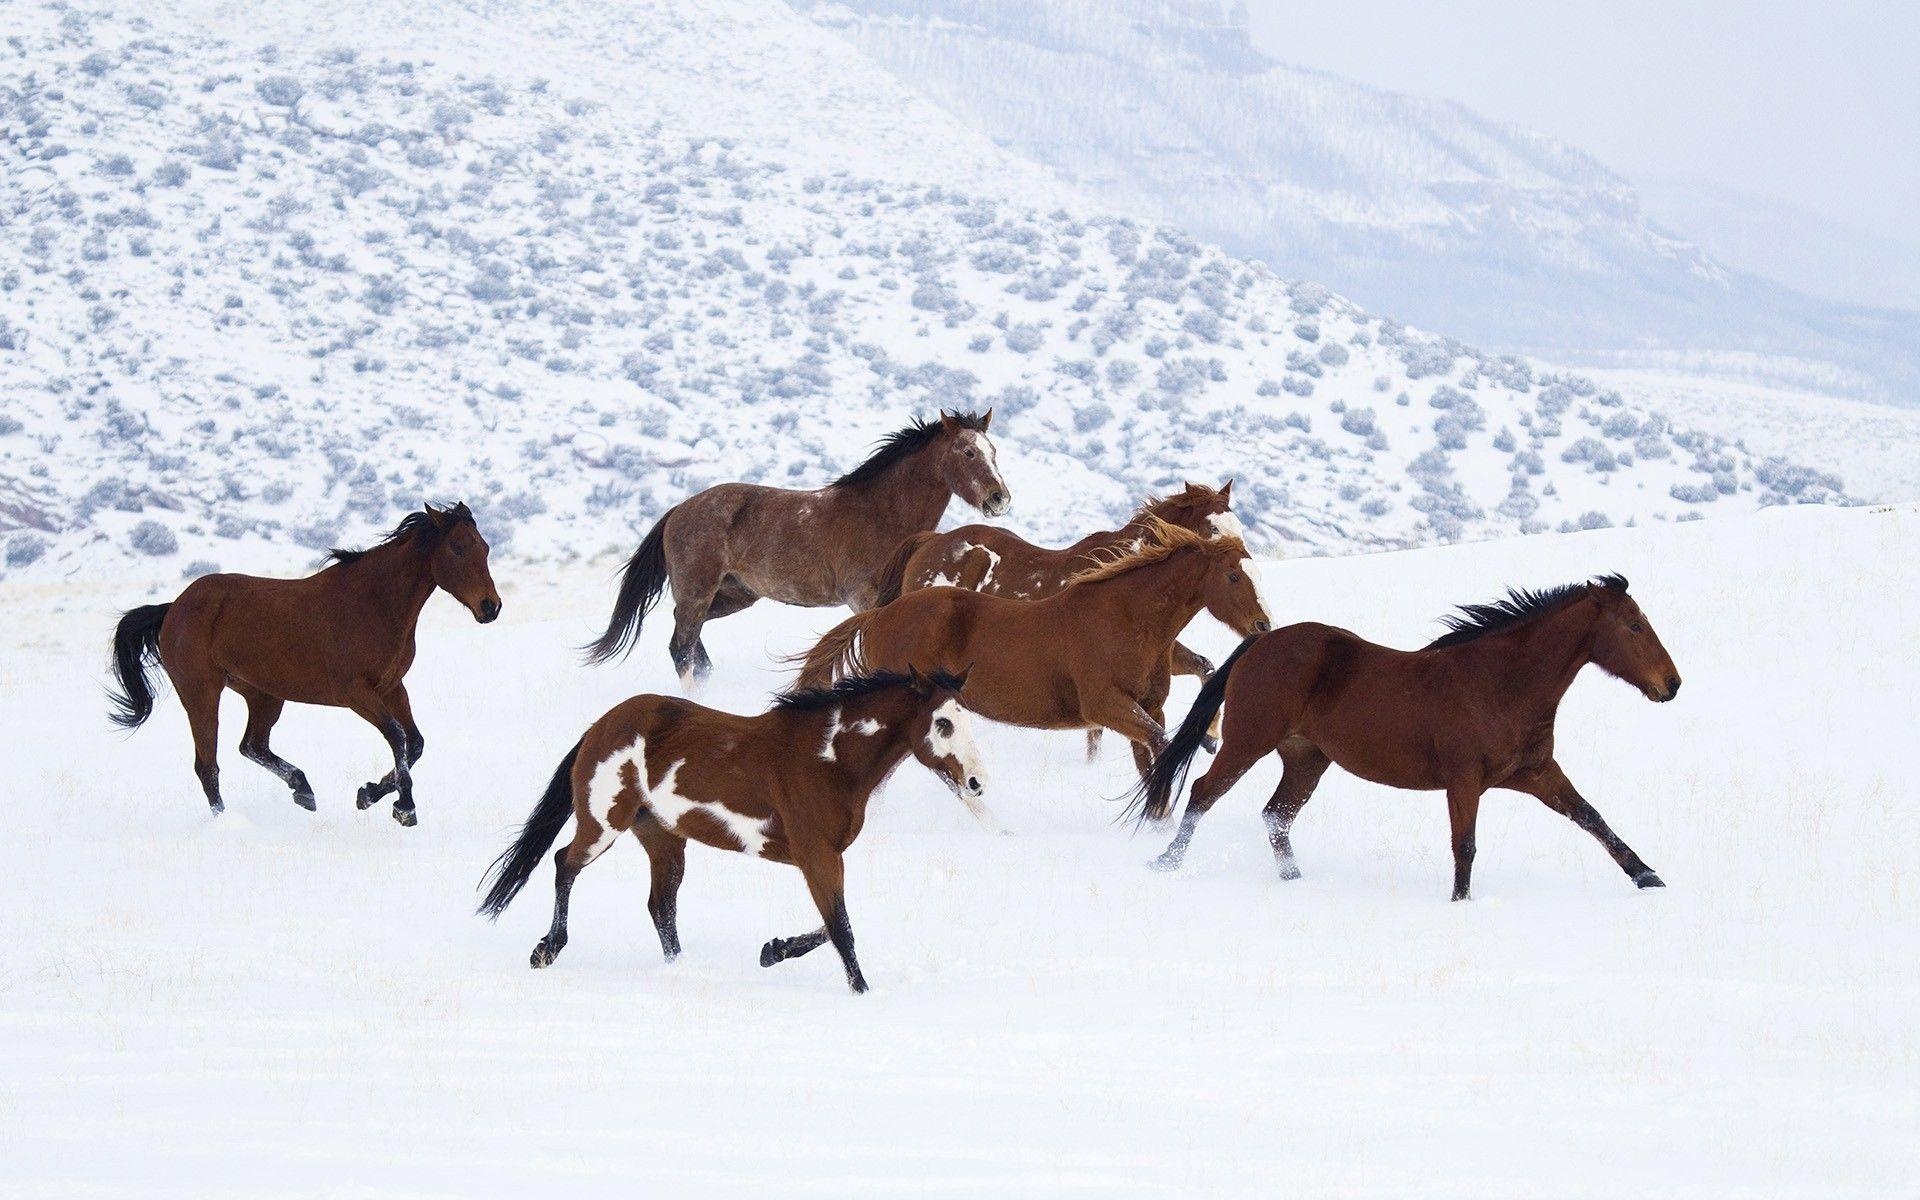 Horses in the Snow, Horses in the snow wallpapers, 1920x1200 HD Desktop